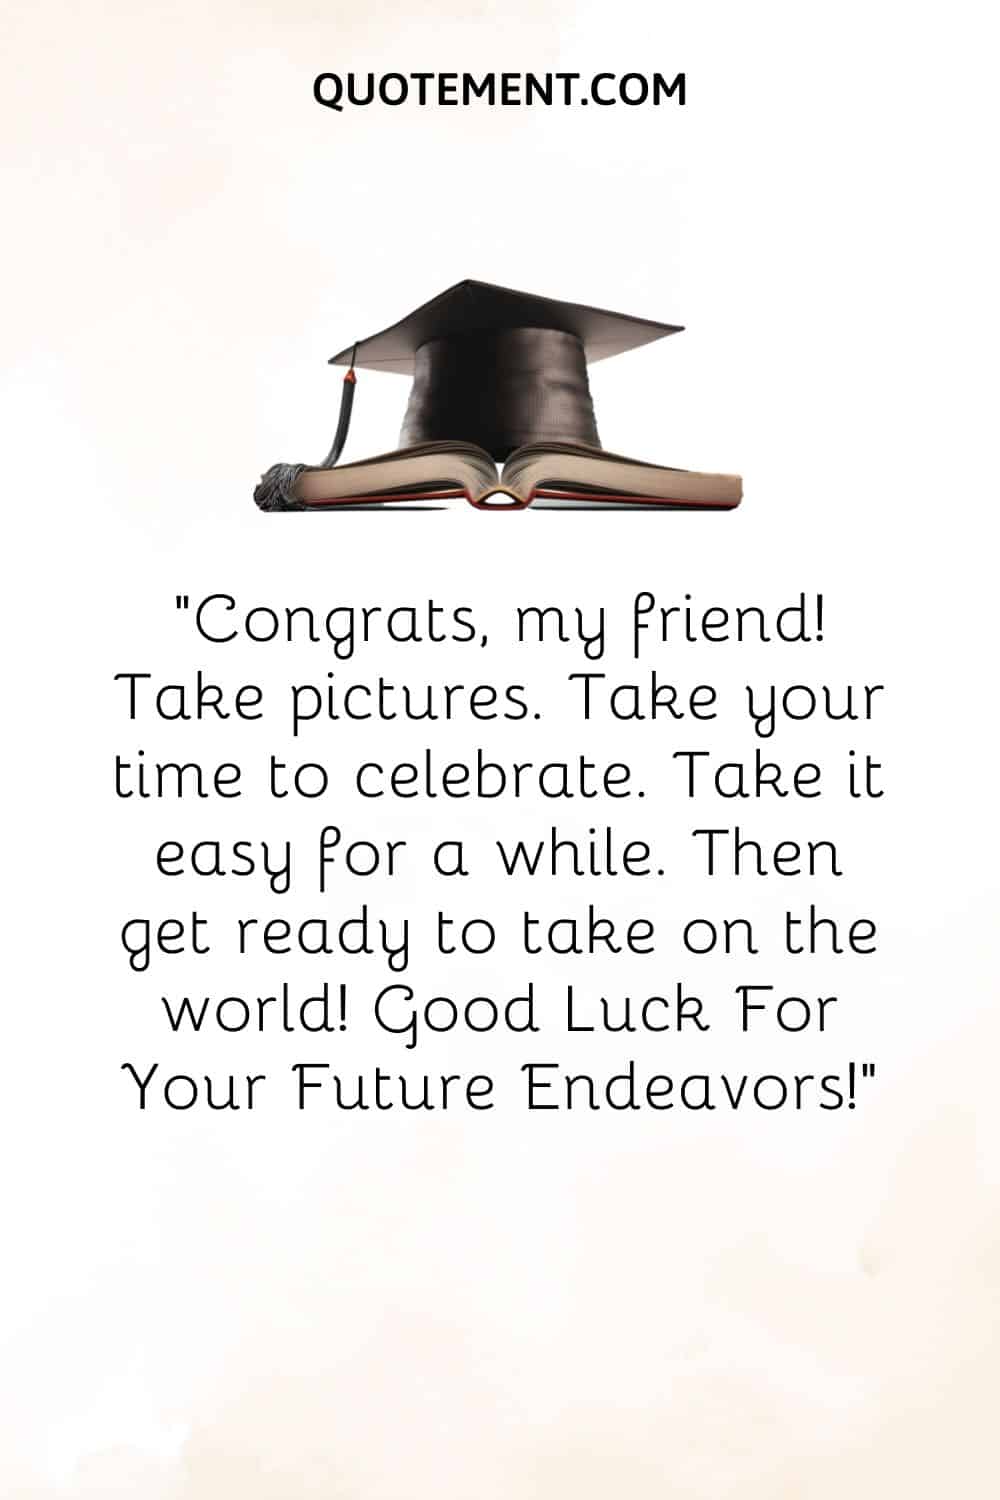 Congrats, my friend! Take pictures. Take your time to celebrate. Take it easy for a while. Then get ready to take on the world! Good Luck For Your Future Endeavors!